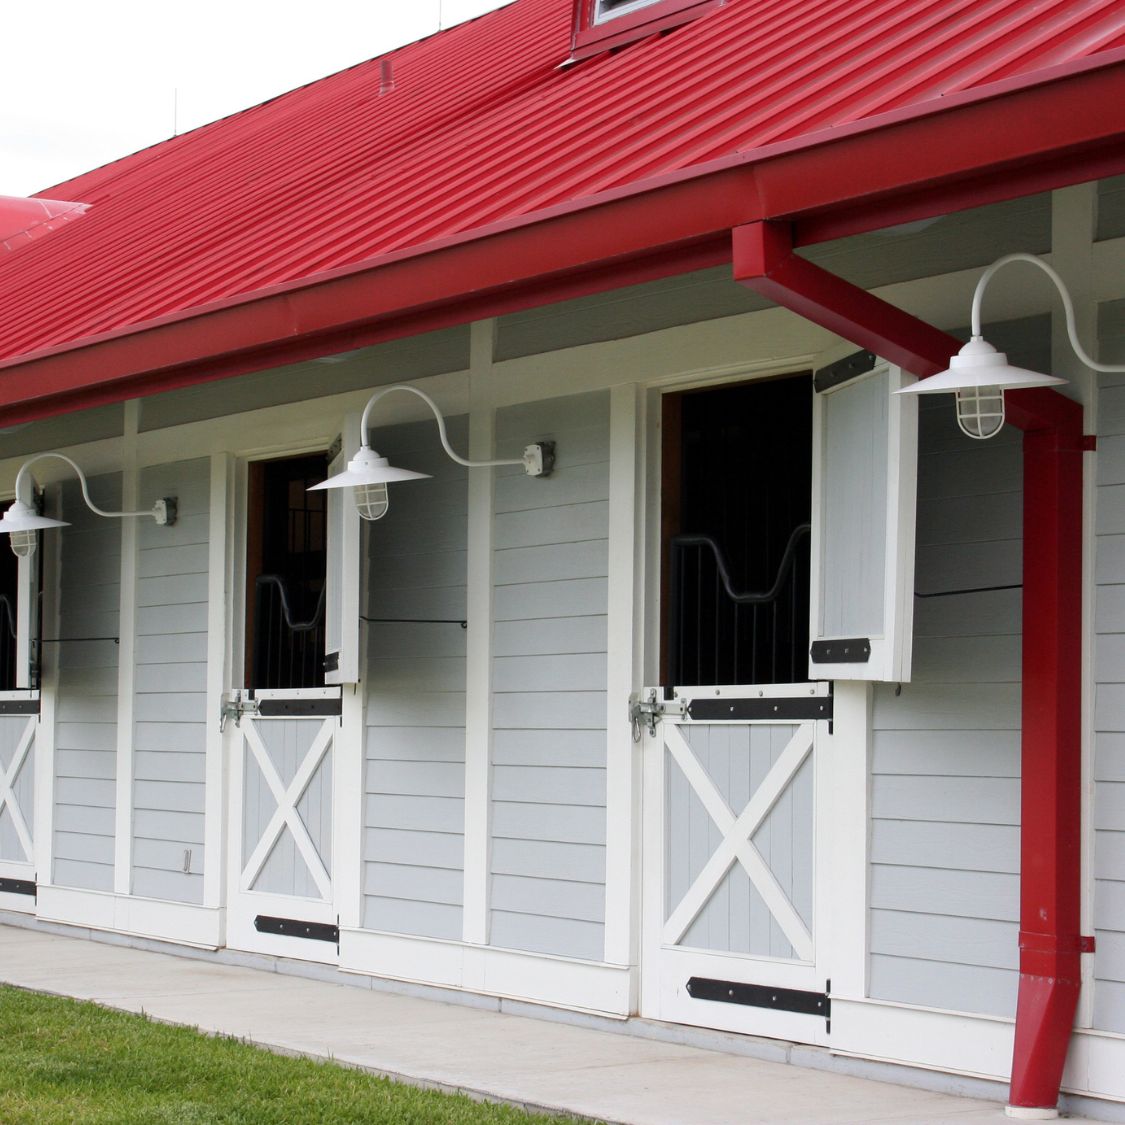 Horse Barn Upgrades That Benefit You and Your Horse